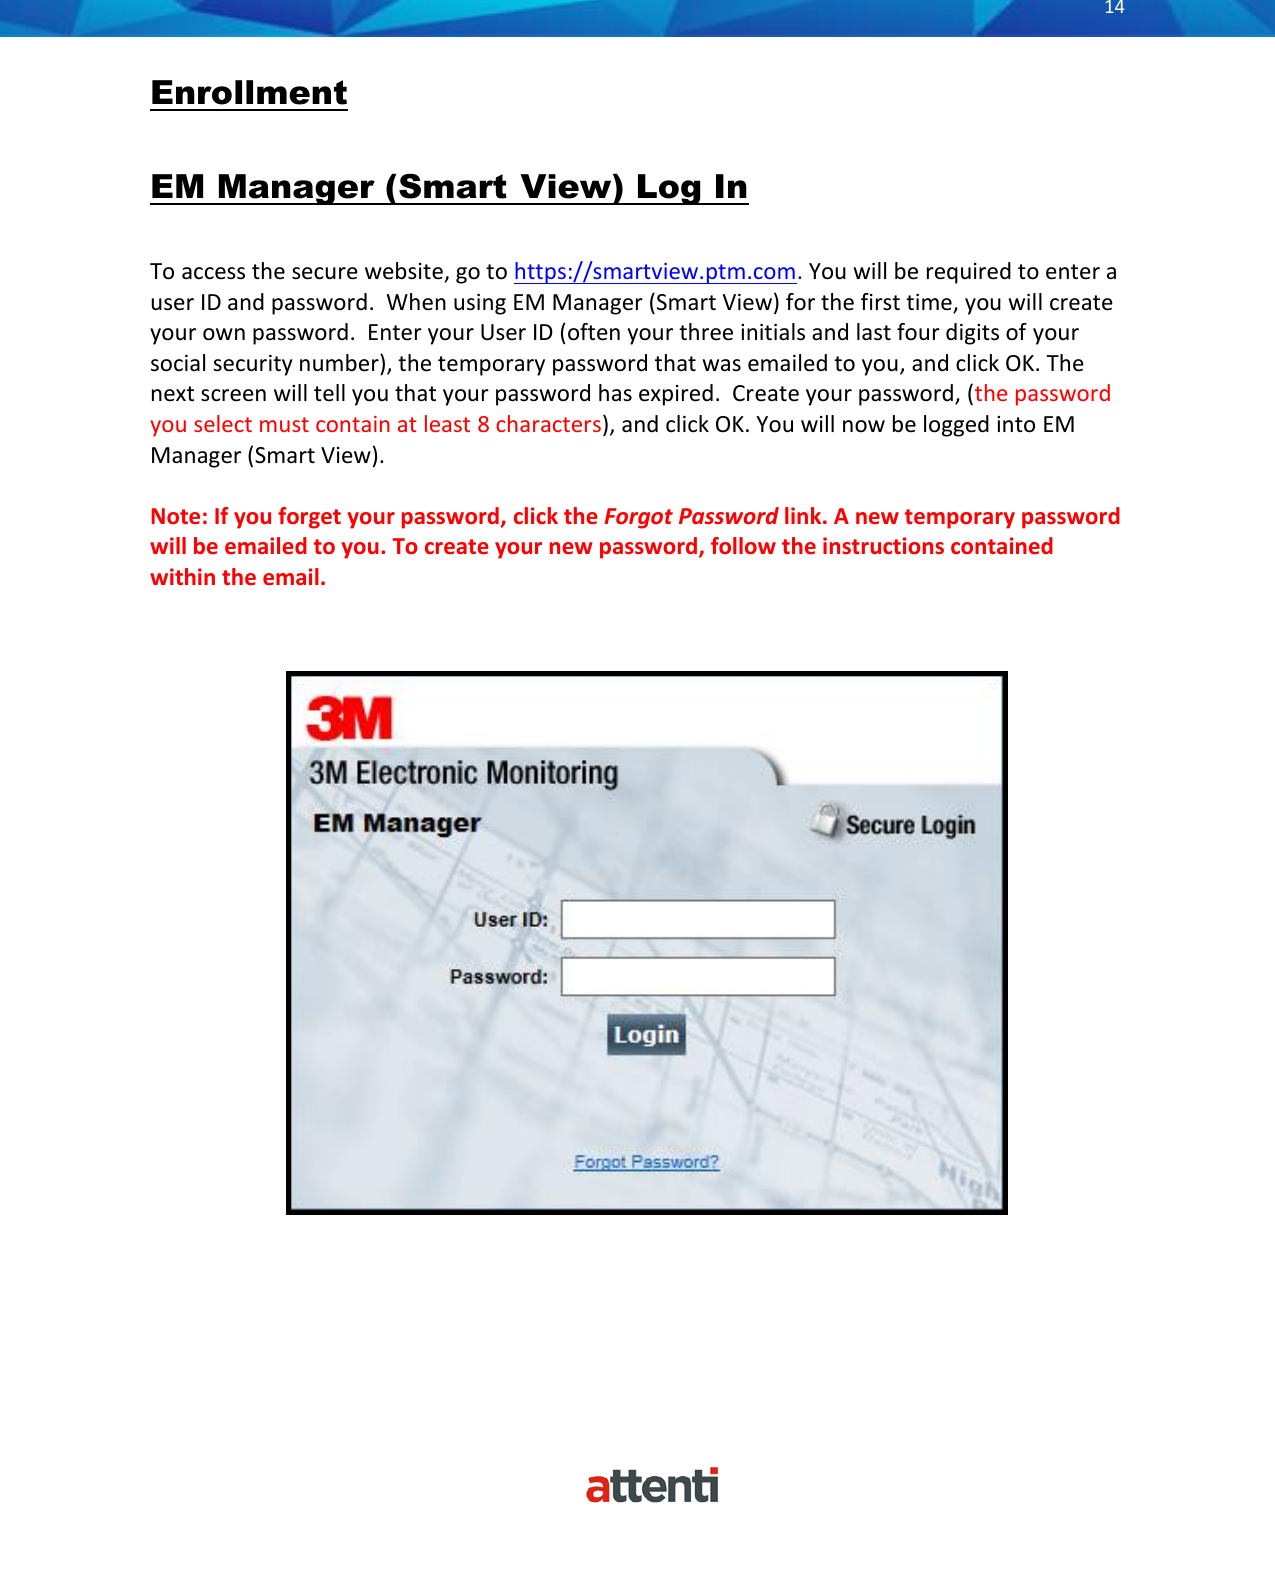       14          Enrollment  EM Manager (Smart  View) Log In  To access the secure website, go to https://smartview.ptm.com. You will be required to enter a user ID and password.  When using EM Manager (Smart View) for the first time, you will create your own password.  Enter your User ID (often your three initials and last four digits of your social security number), the temporary password that was emailed to you, and click OK. The next screen will tell you that your password has expired.  Create your password, (the password you select must contain at least 8 characters), and click OK. You will now be logged into EM Manager (Smart View).  Note: If you forget your password, click the Forgot Password link. A new temporary password will be emailed to you. To create your new password, follow the instructions contained within the email.           